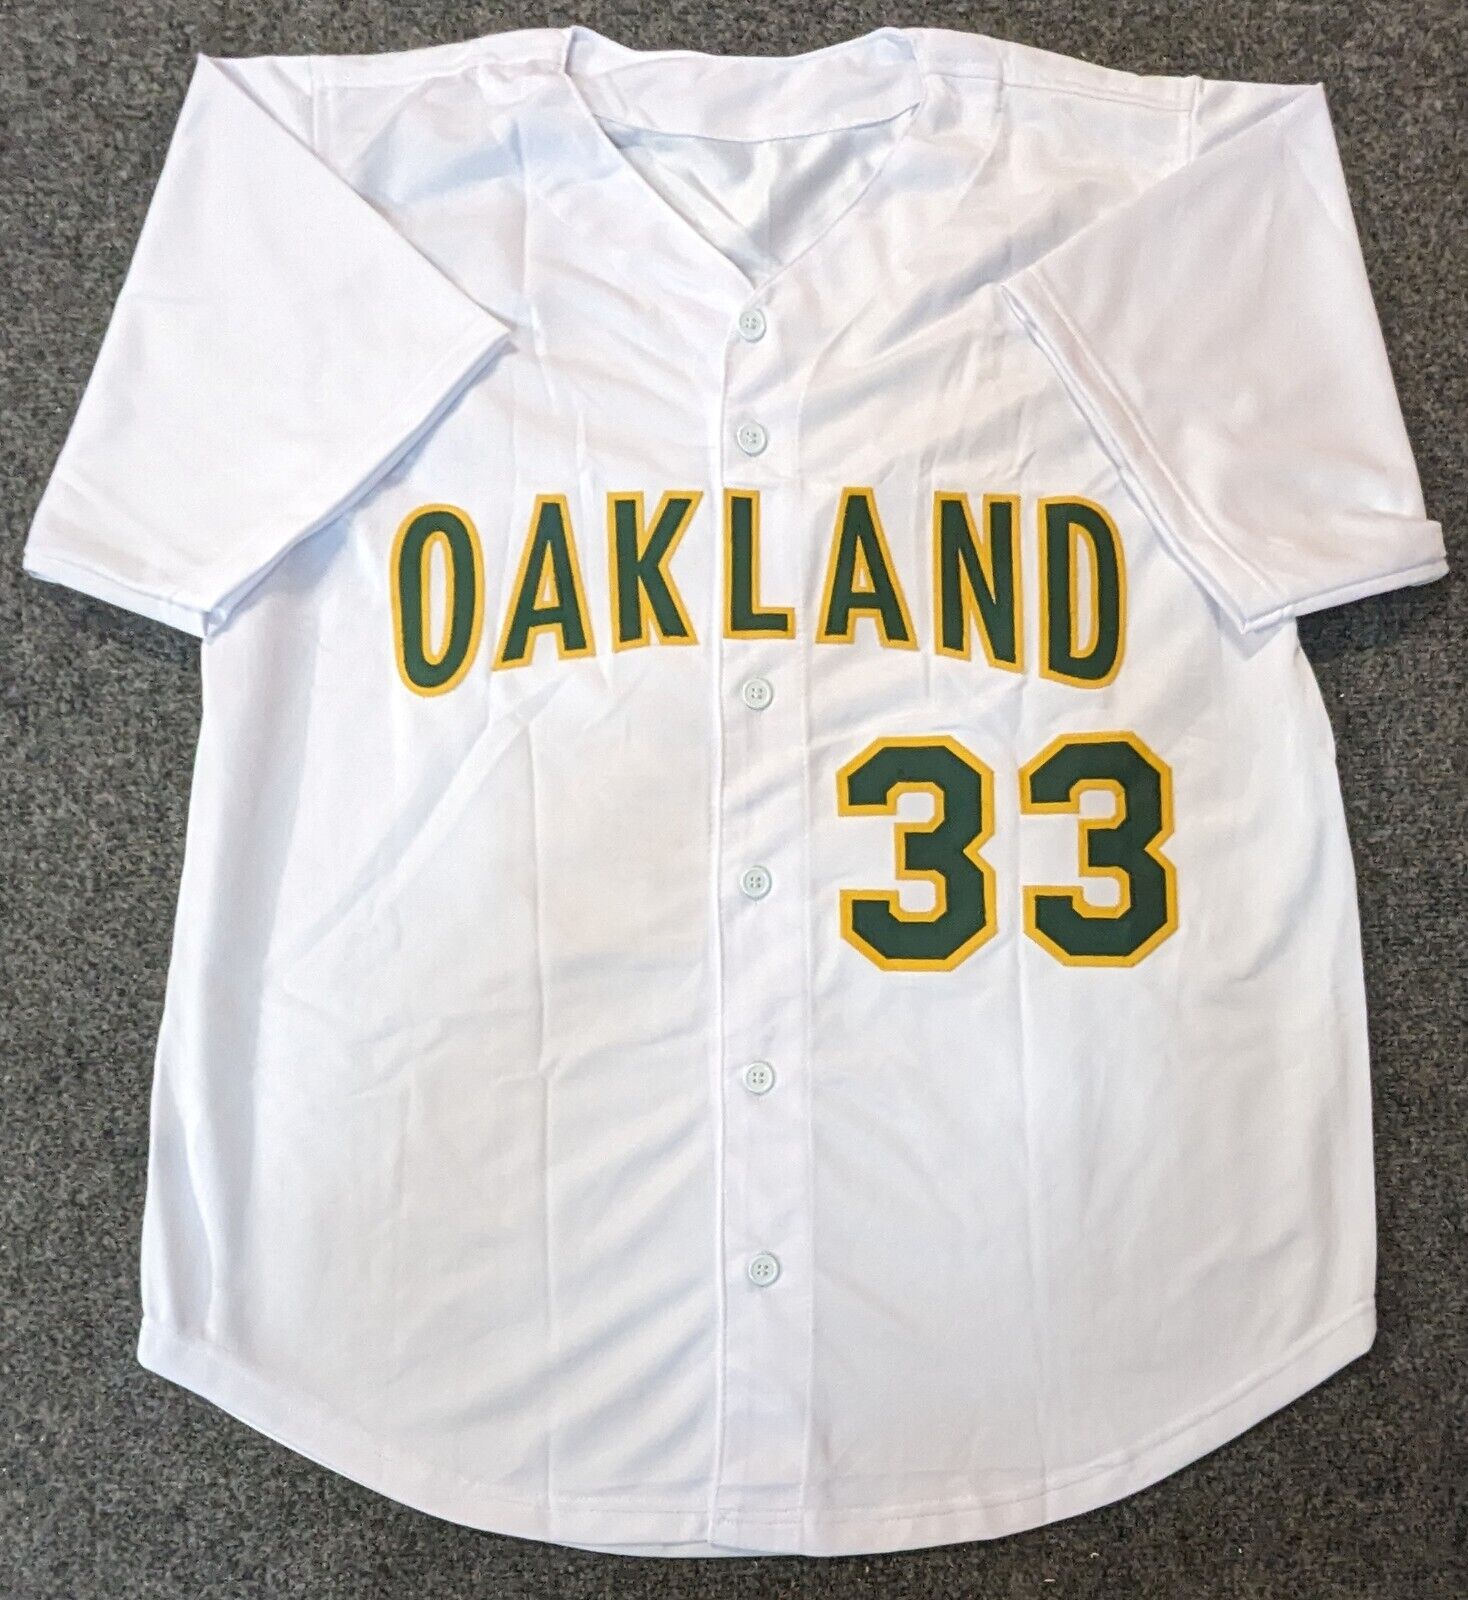 Jose Canseco Oakland Athletics Autographed Yellow Mitchell & Ness